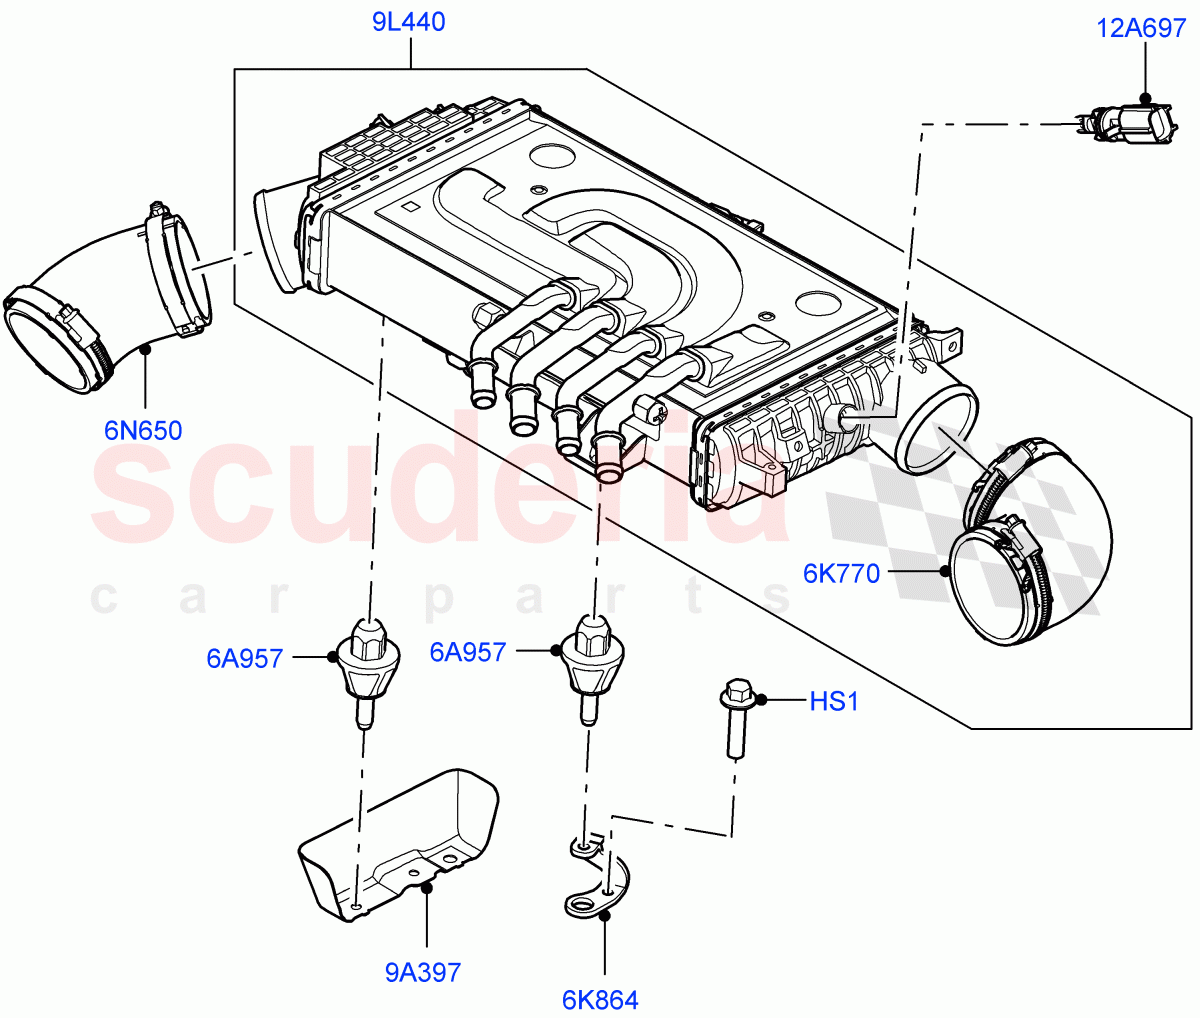 Intercooler/Air Ducts And Hoses(Nitra Plant Build)(3.0L AJ20D6 Diesel High)((V)FROMM2000001) of Land Rover Land Rover Defender (2020+) [3.0 I6 Turbo Diesel AJ20D6]